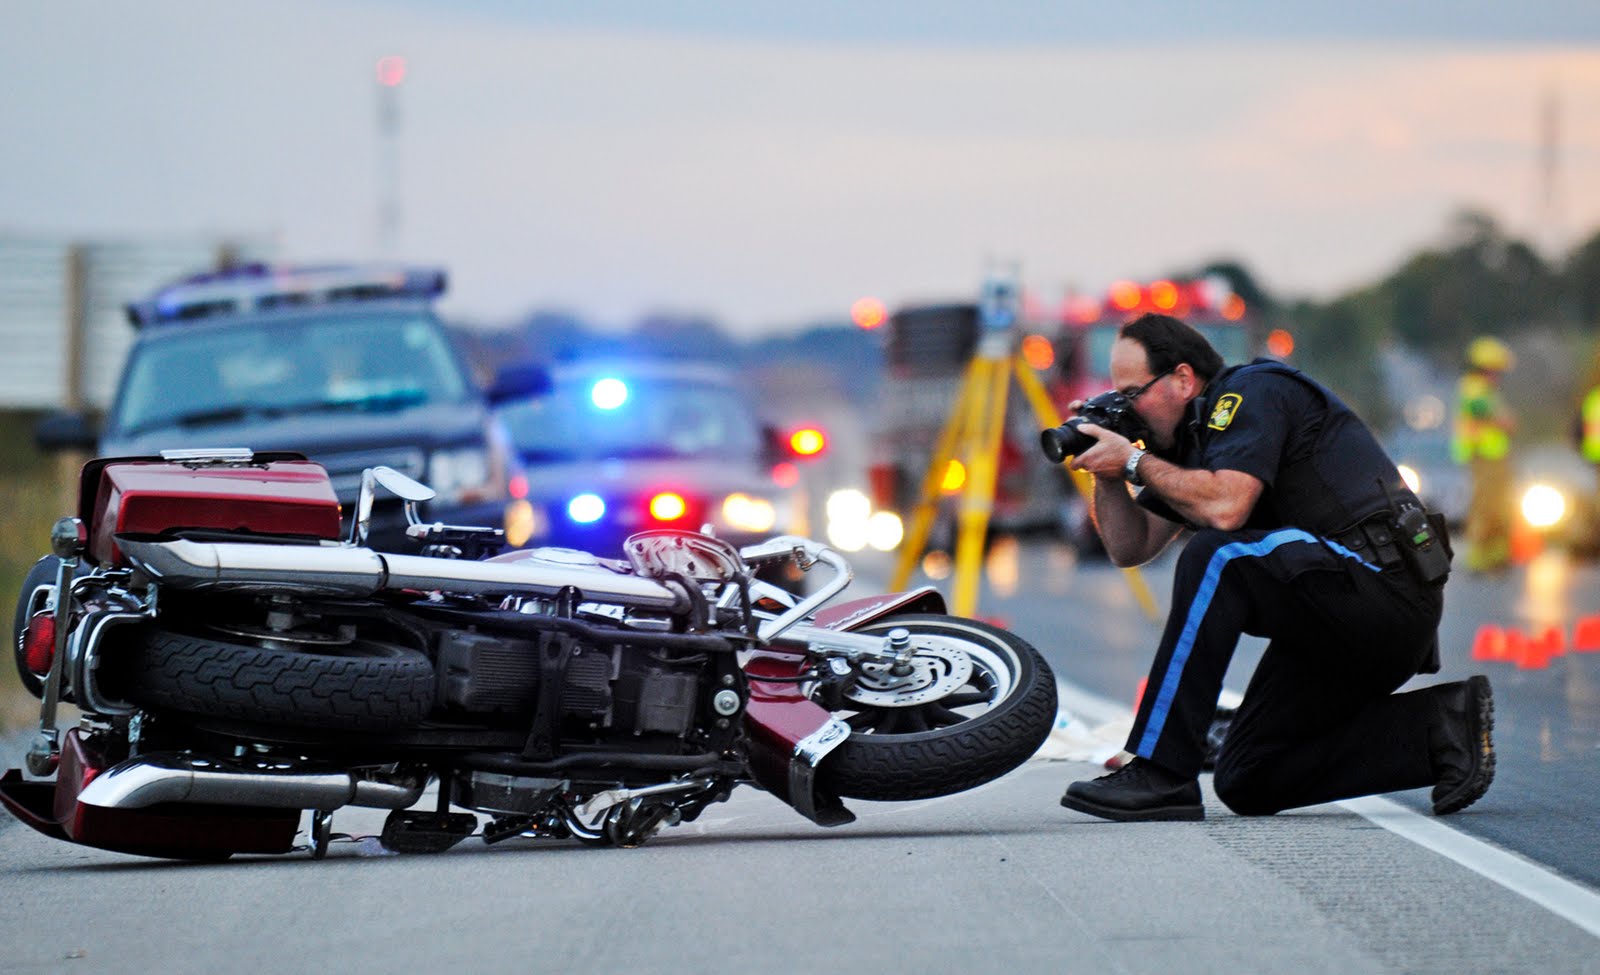 Motorcycle Accident Claim After A Motorcycle Accident: A Guide To Making A Compensation Claim